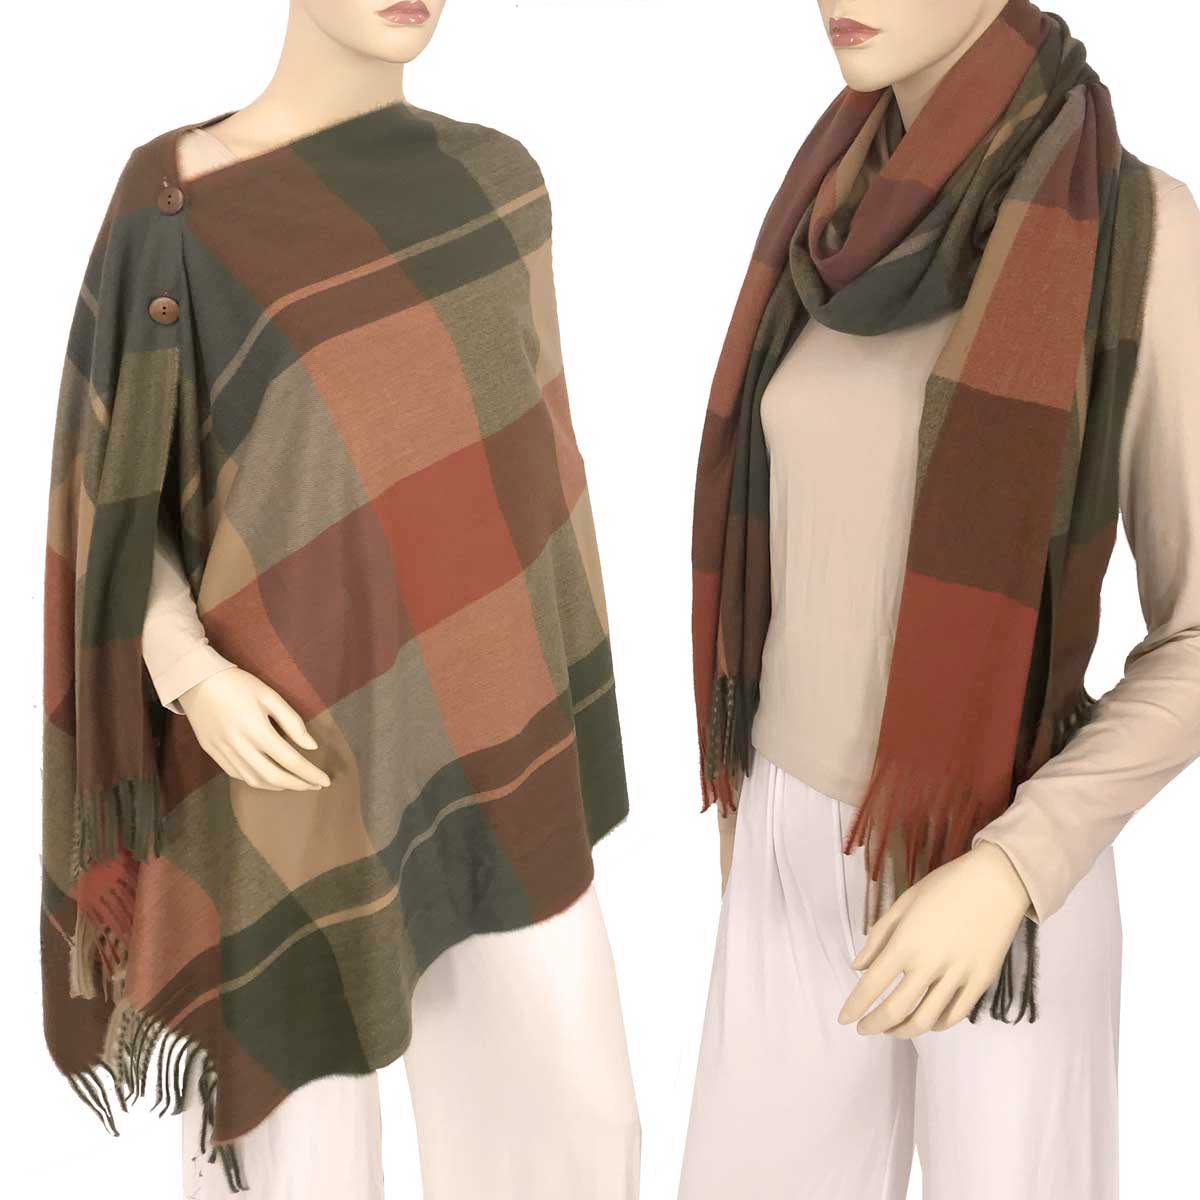 3306 - Plaid Button Shawls 3306 PLAID GREY #21 with Black Buttons - 